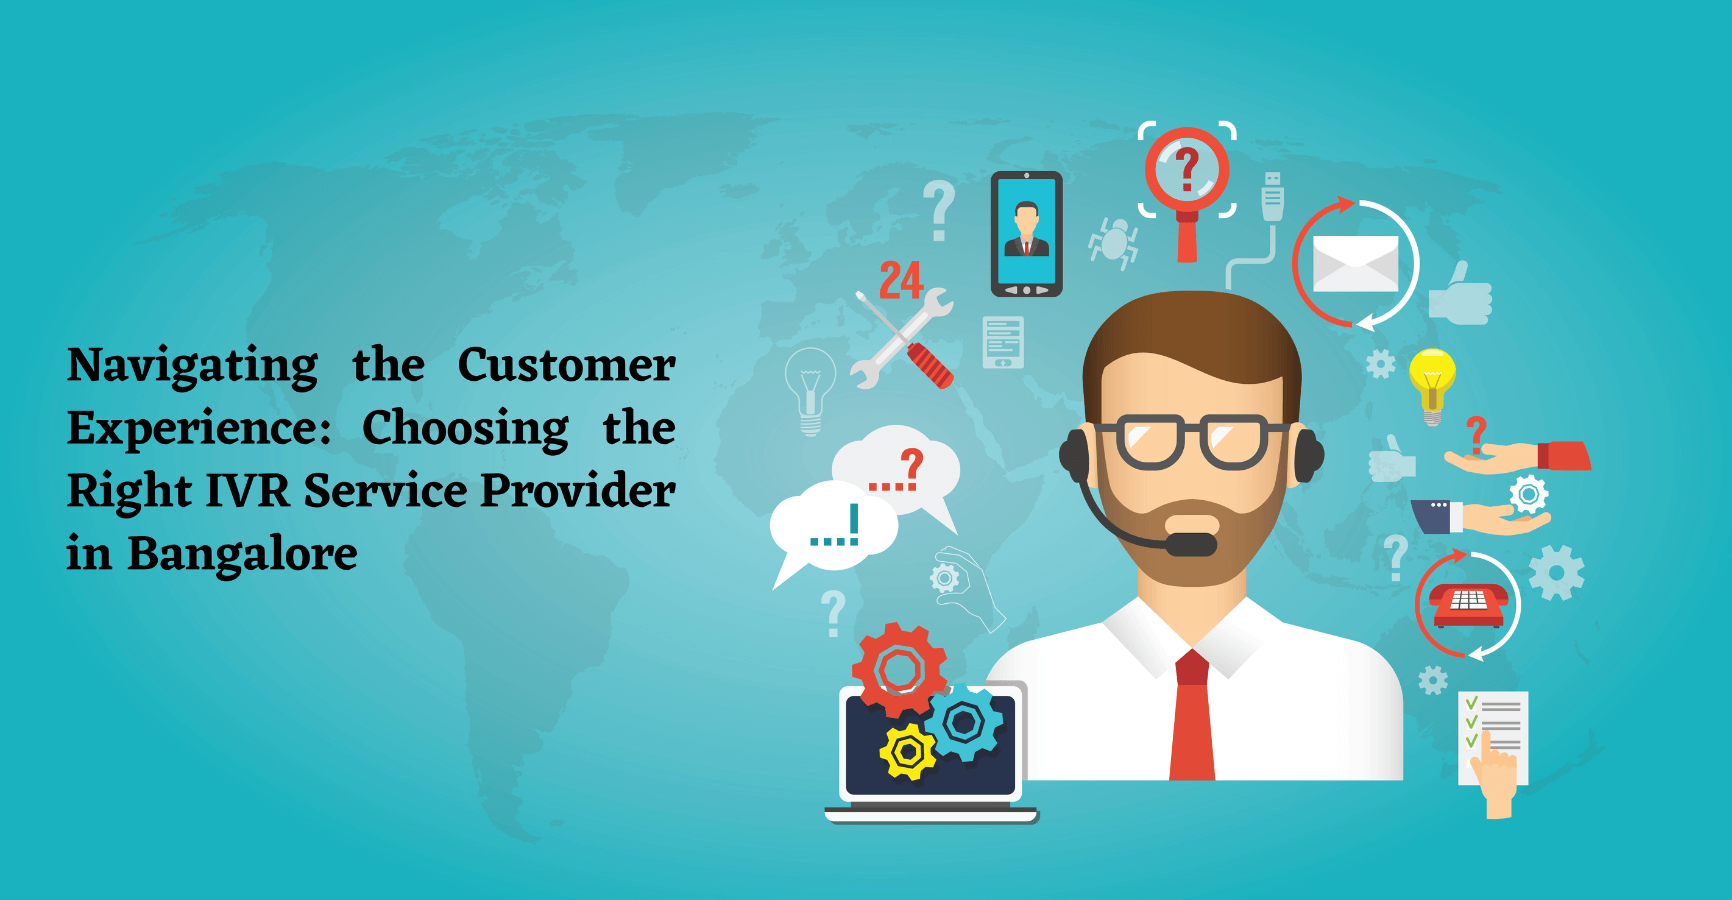 Navigating the Customer Experience: Choosing the Right IVR Service Provider in Bangalore